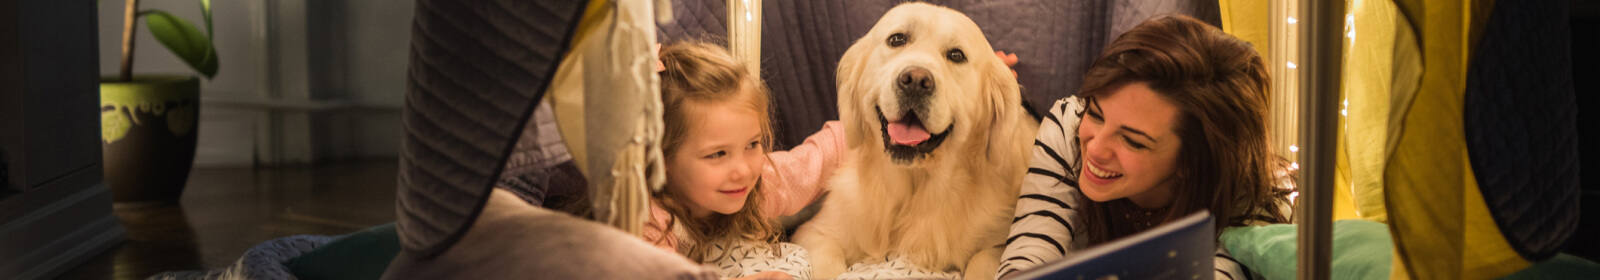 Mother and daughter camping indoors with the family dog.